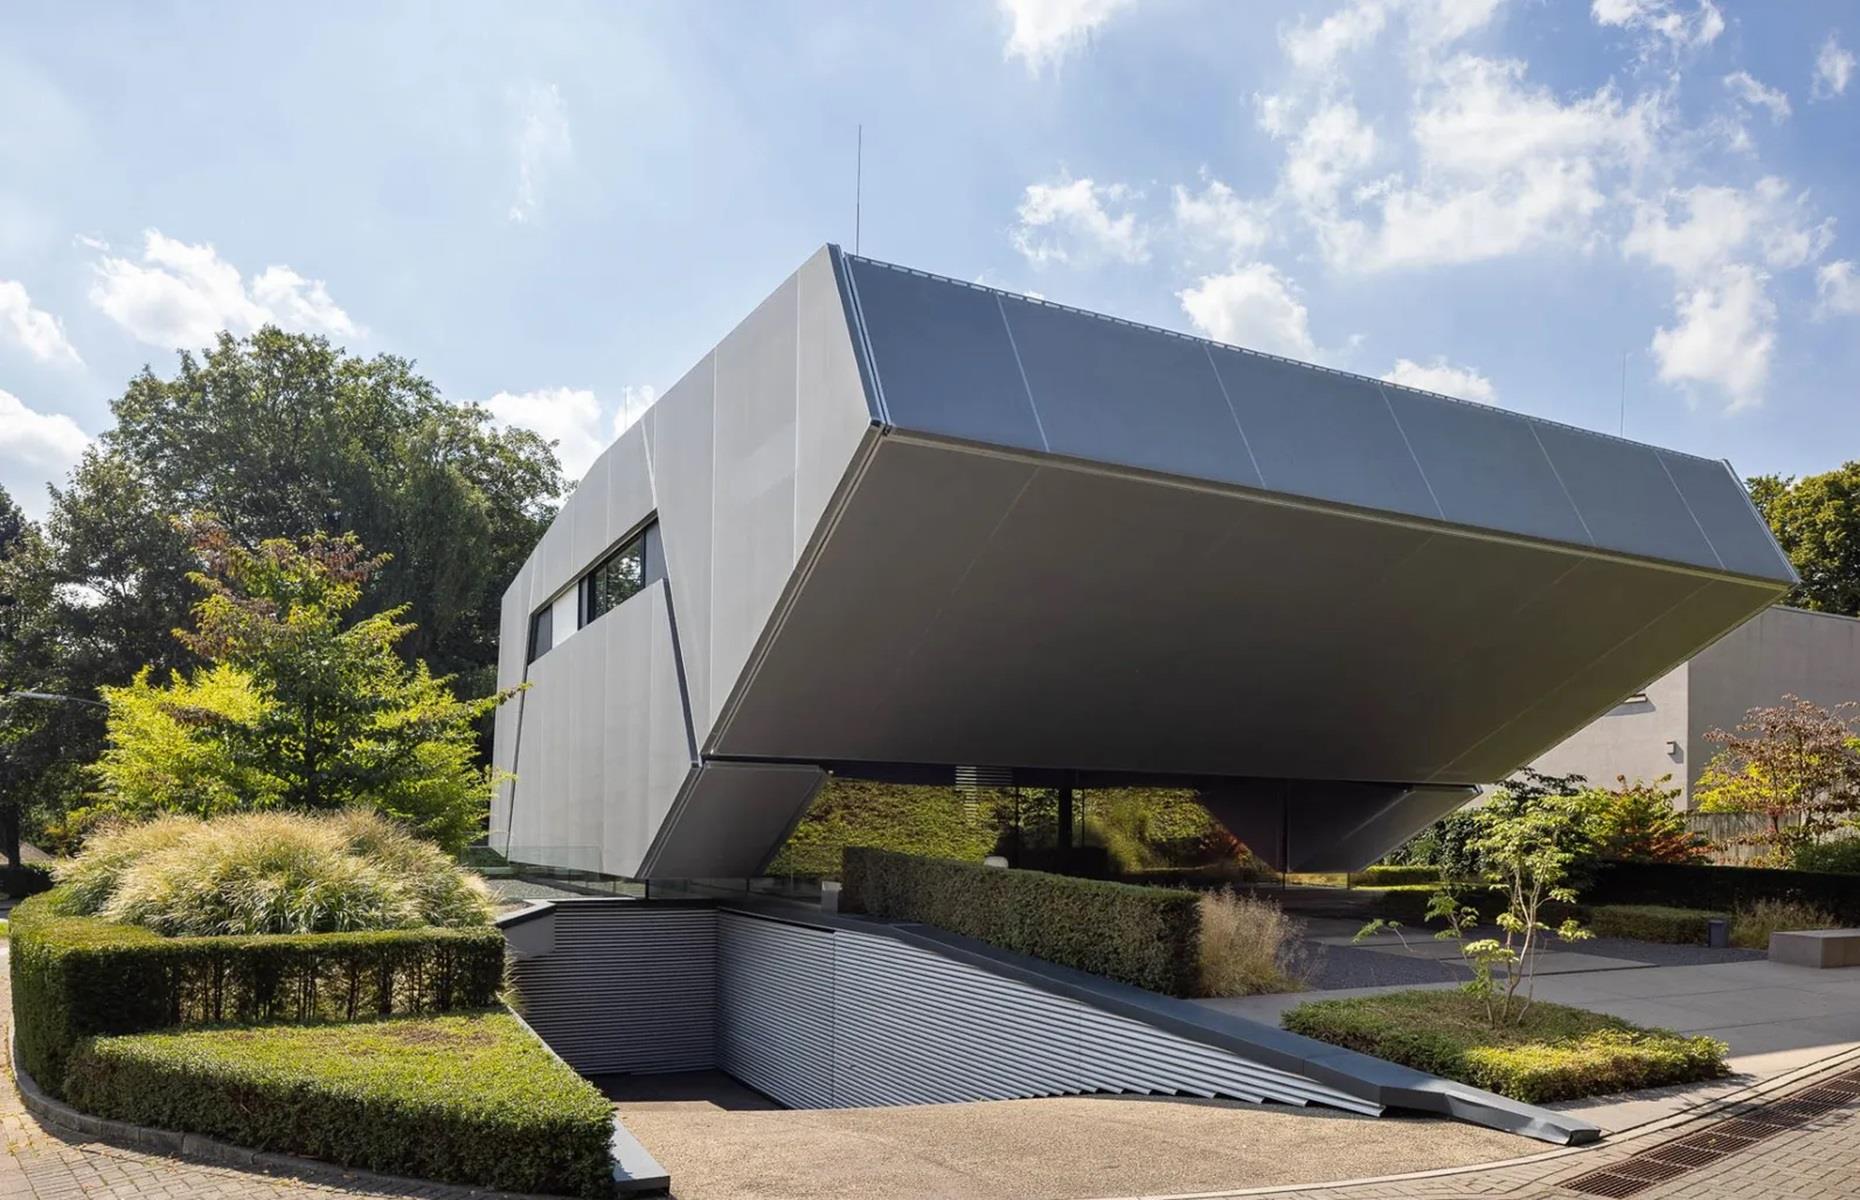 <p>The antipode of traditional, this extraordinary German villa resembles a <a href="https://www.loveproperty.com/gallerylist/84471/amazing-ufo-homes-that-are-out-of-this-world">spacecraft</a> and is all sharp angles and metal. Listing agents, <a href="https://www.sothebysrealty.com/eng/sales/detail/180-l-85631-82n9je/avant-garde-luxury-villa-on-the-landscape-conservation-area-dusseldorf-nw-40629">Sotheby's International Realty</a>, described the place as embodying “modern architecture in its purest form,” with a “geometrically cut body” that floats “weightlessly above a glass joint.” </p>